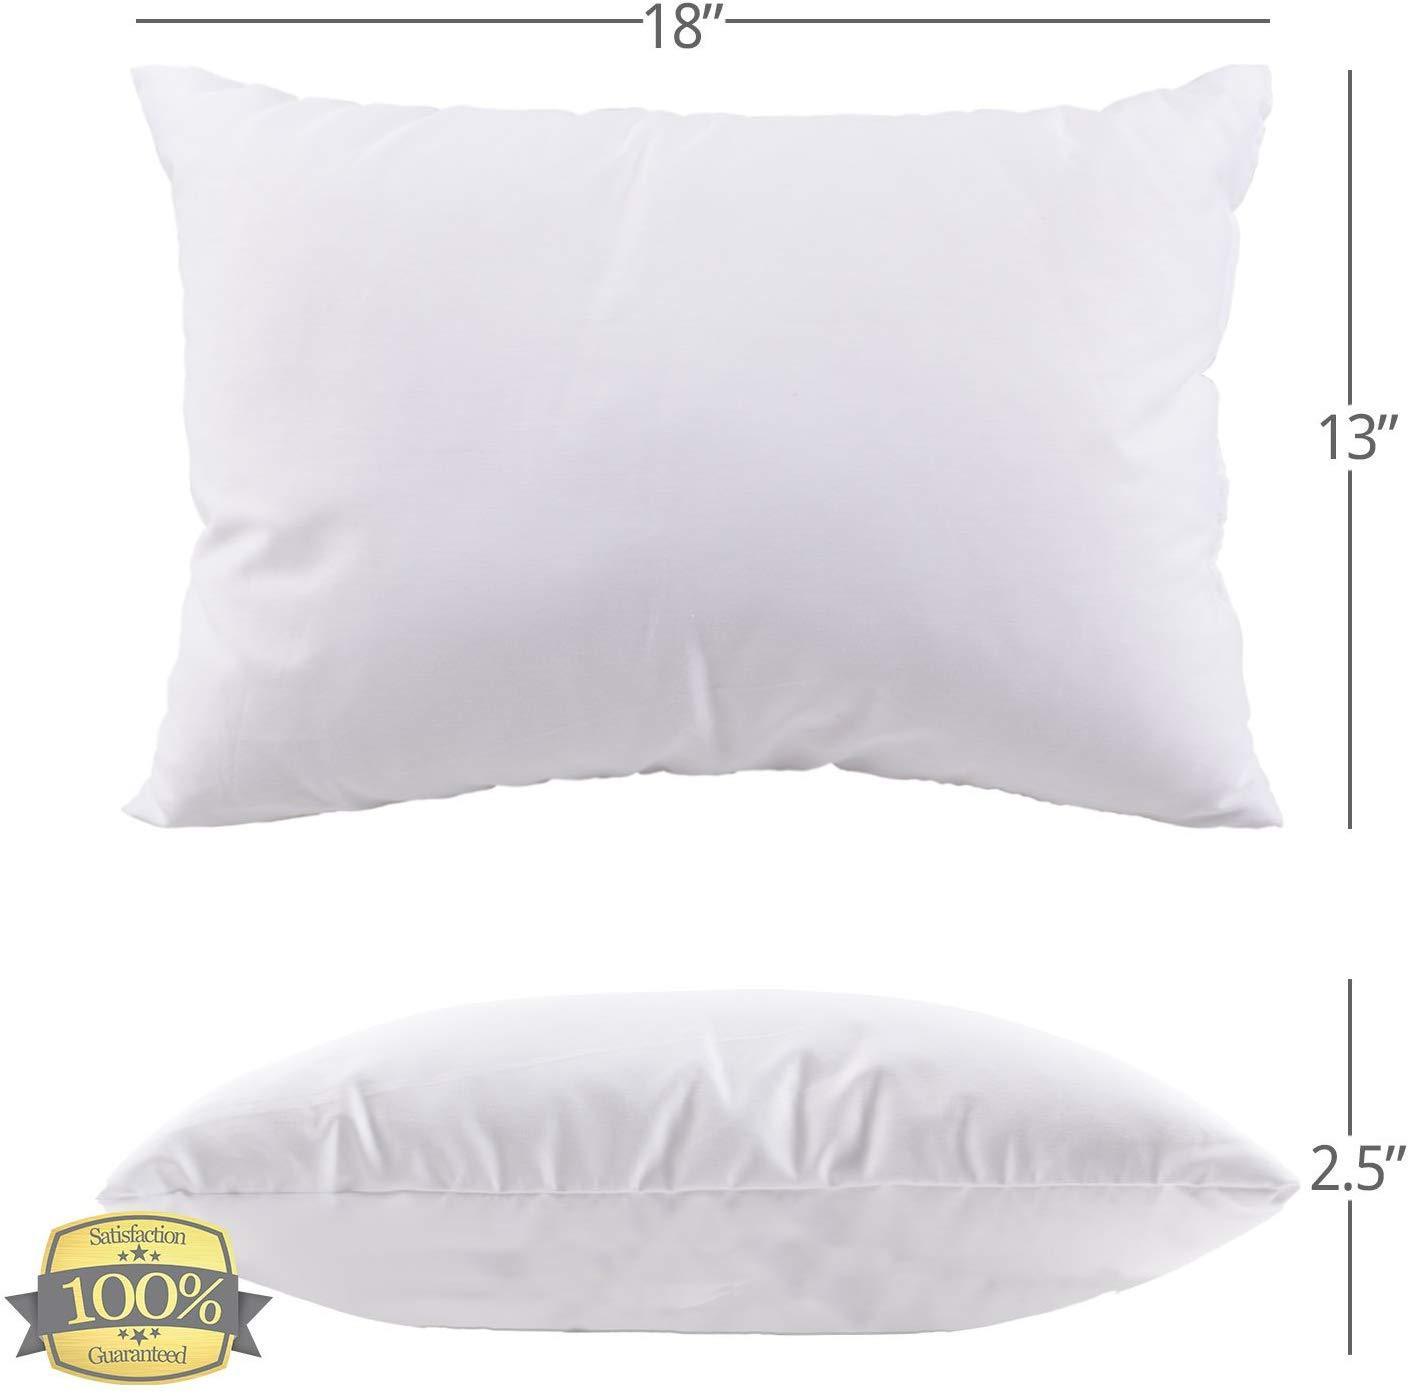 Toddler Baby Pillow with white pure cotton Cover - sinnohome 